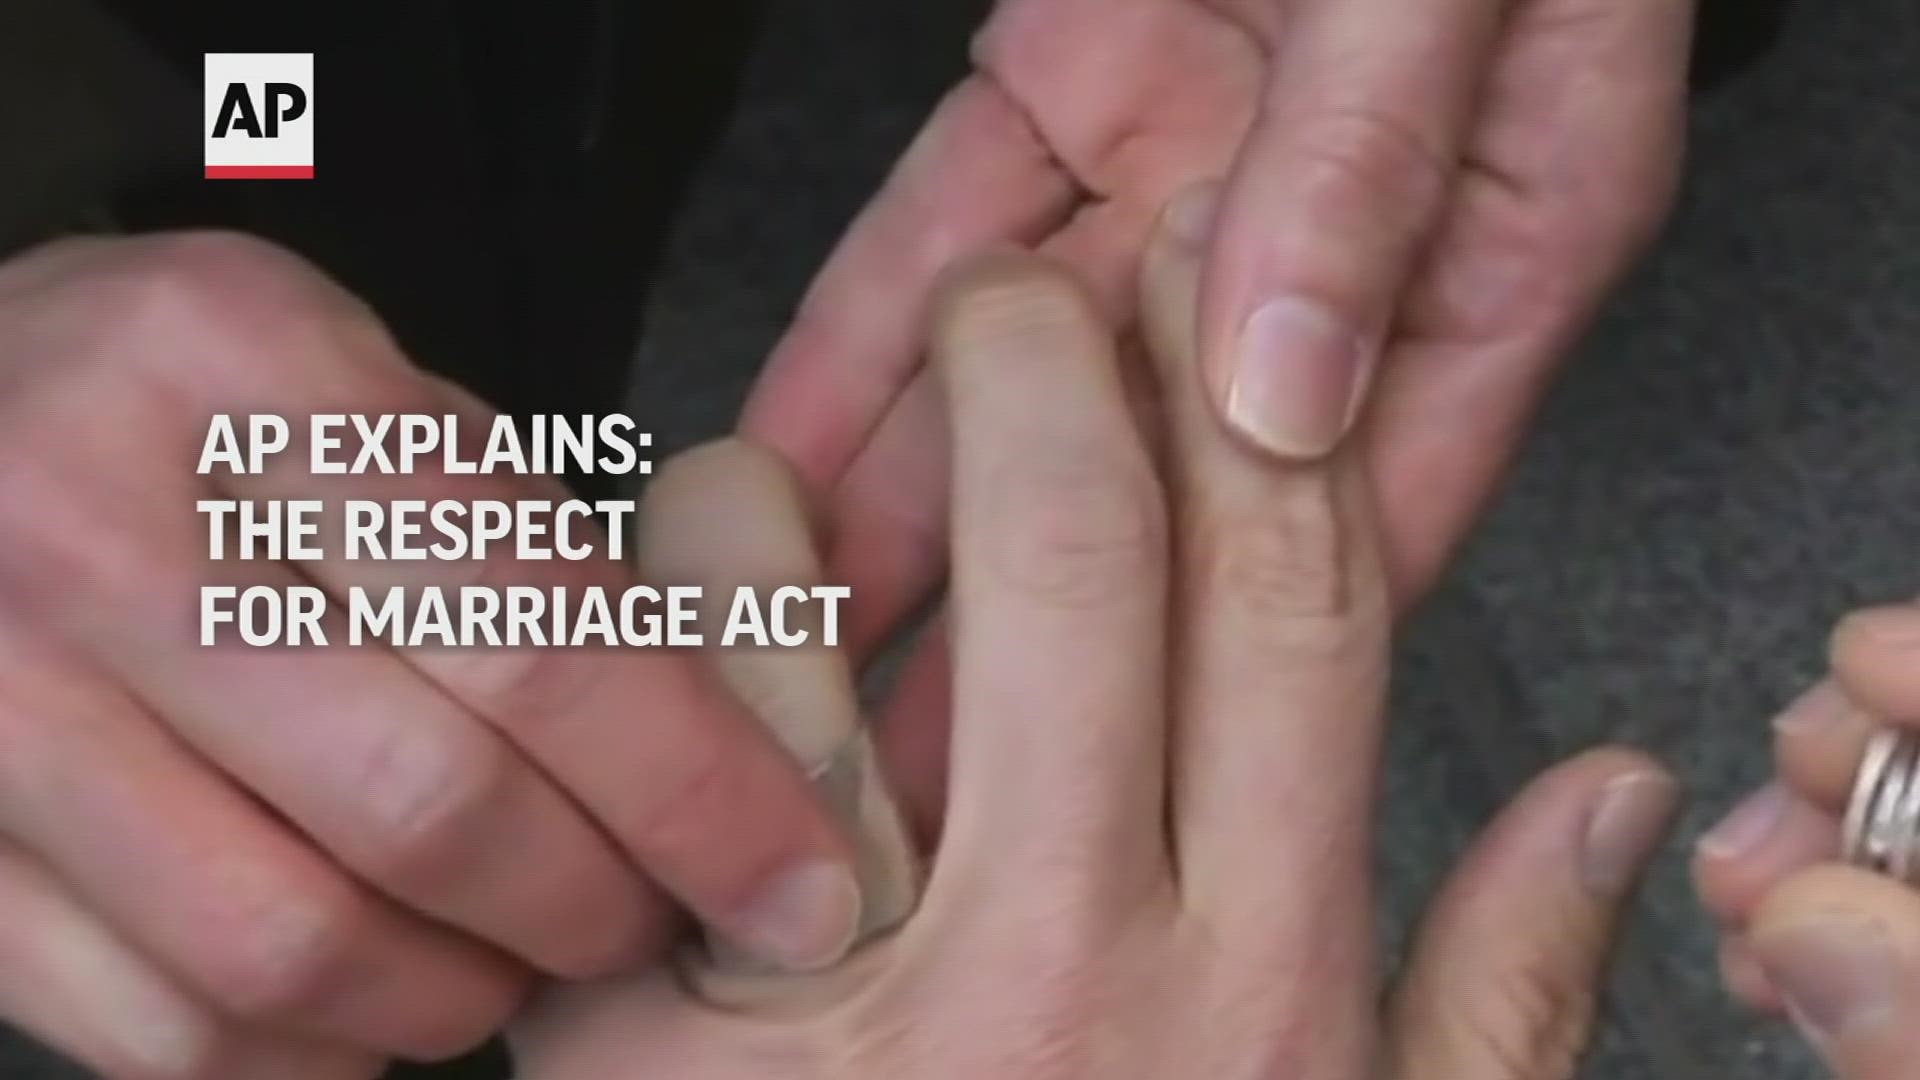 The Associated Press gives a brief explanation of The Respect for Marriage Act.